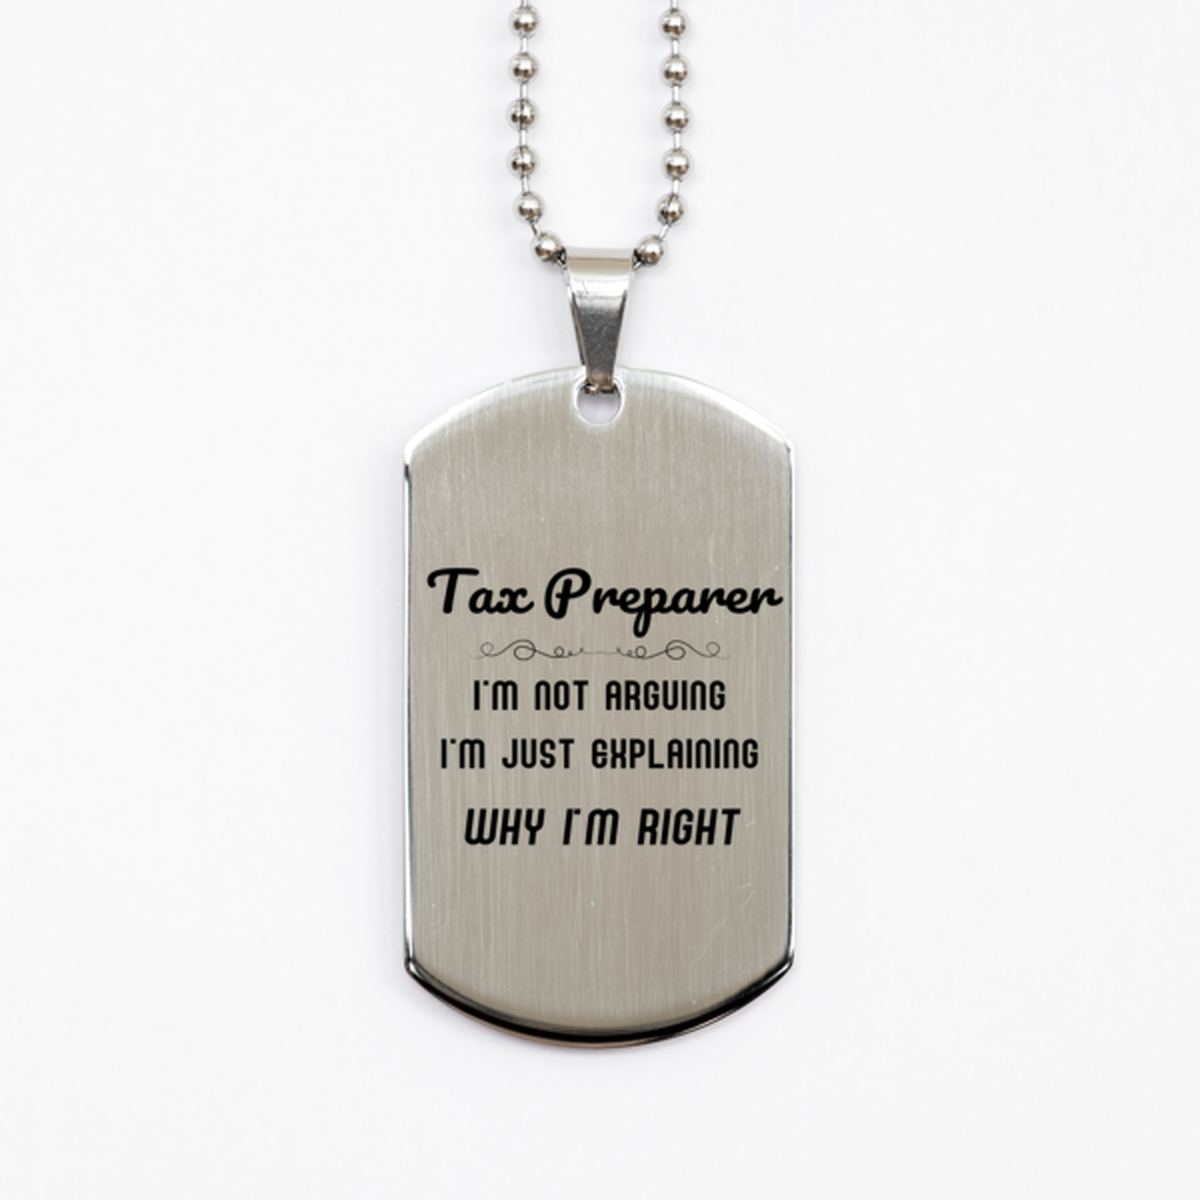 Tax Preparer I'm not Arguing. I'm Just Explaining Why I'm RIGHT Silver Dog Tag, Funny Saying Quote Tax Preparer Gifts For Tax Preparer Graduation Birthday Christmas Gifts for Men Women Coworker